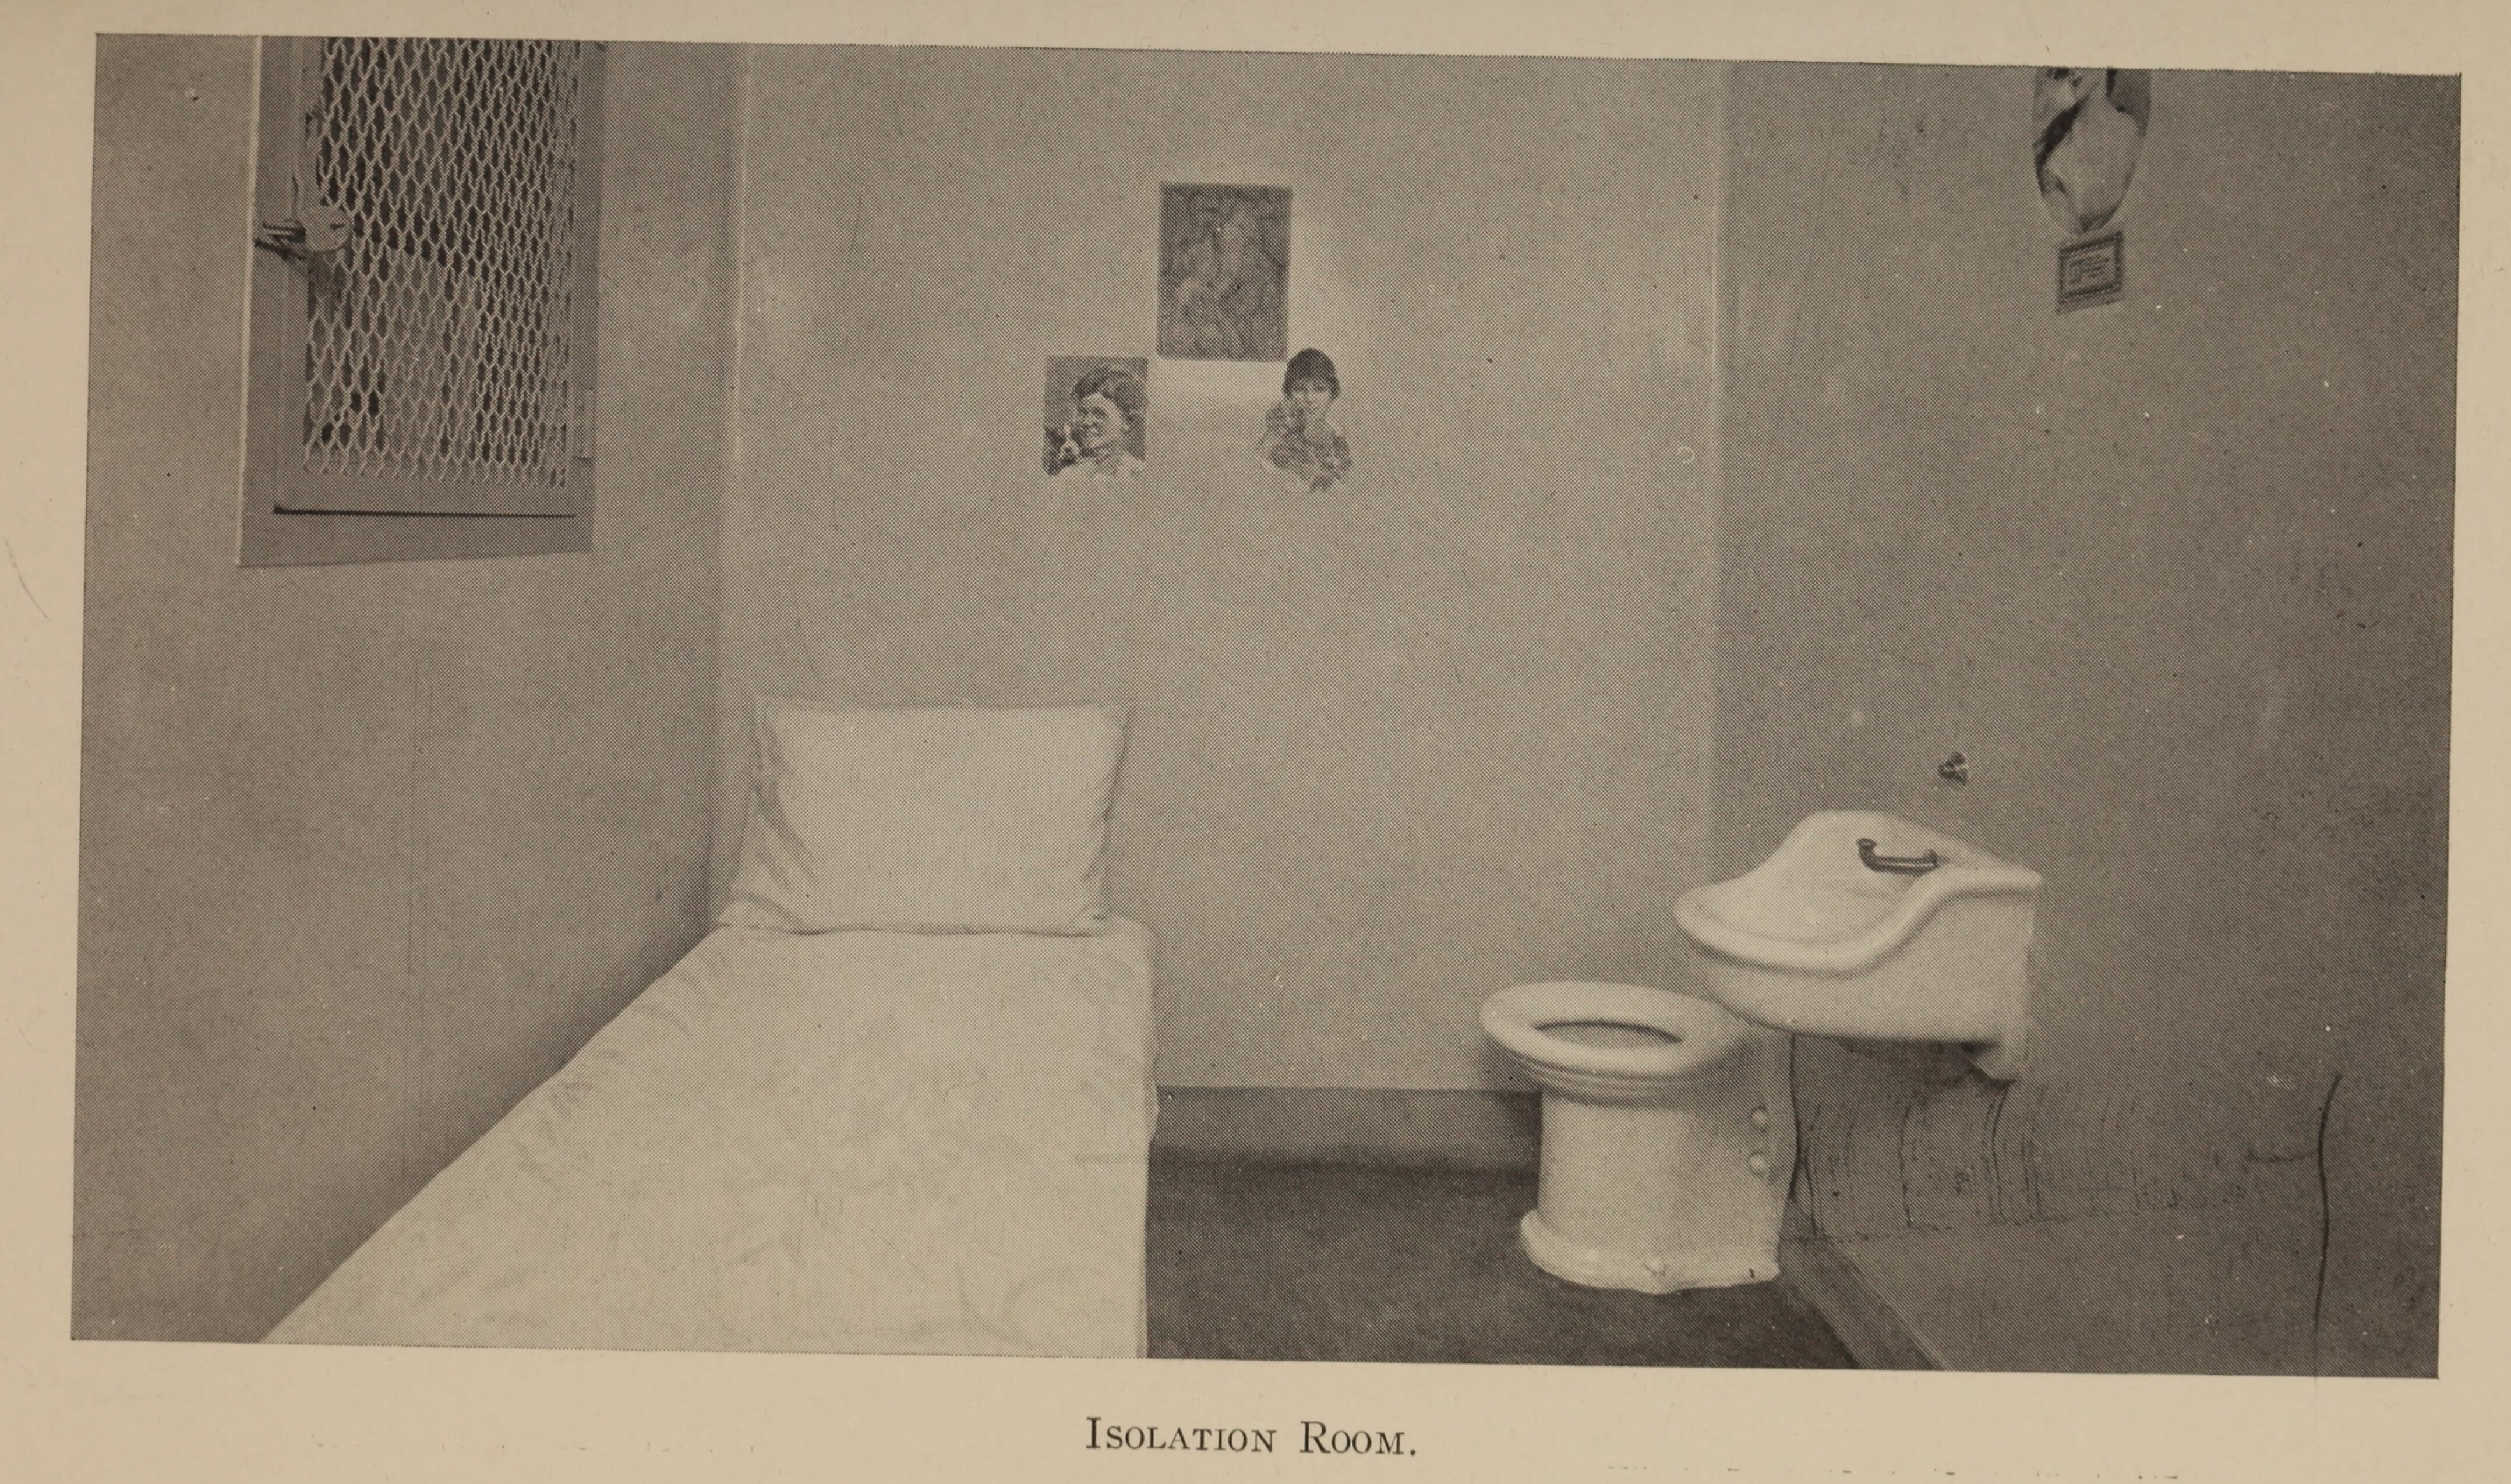 Black and white photograph of a small room with a bed, sink, and toilet